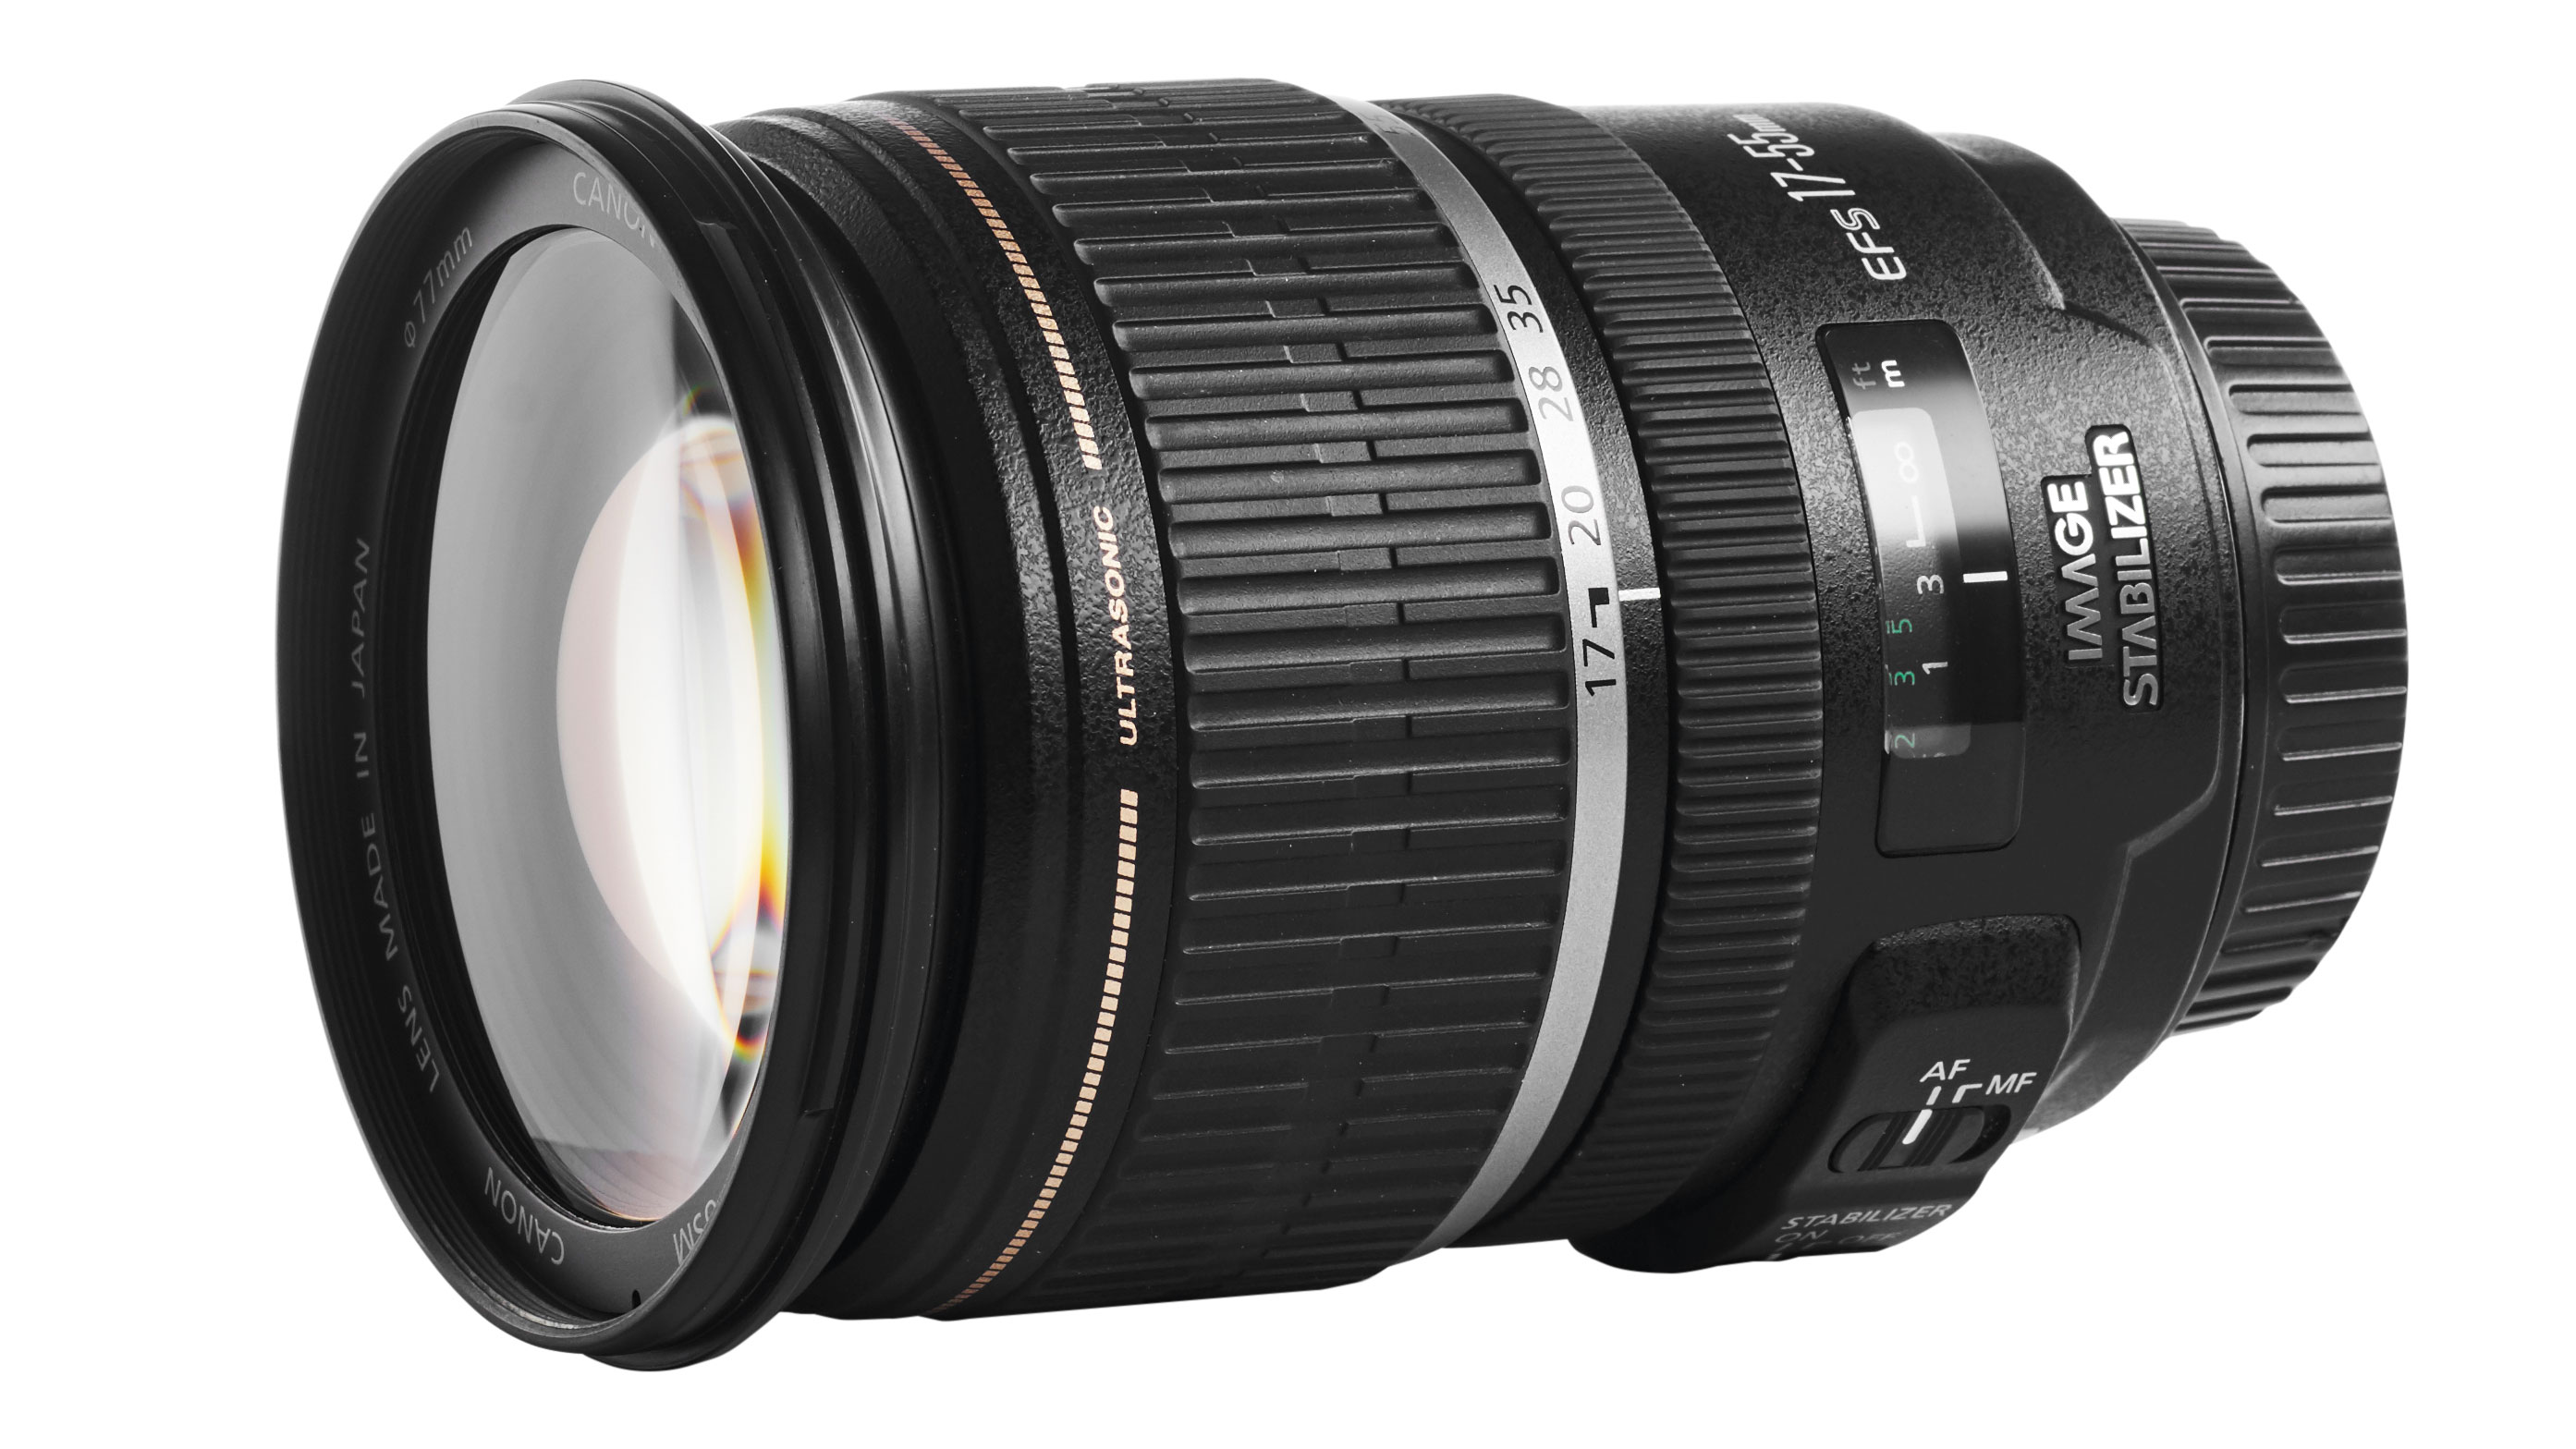 Canon EF-S 17-55mm f/2.8 IS USM review | Digital Camera World